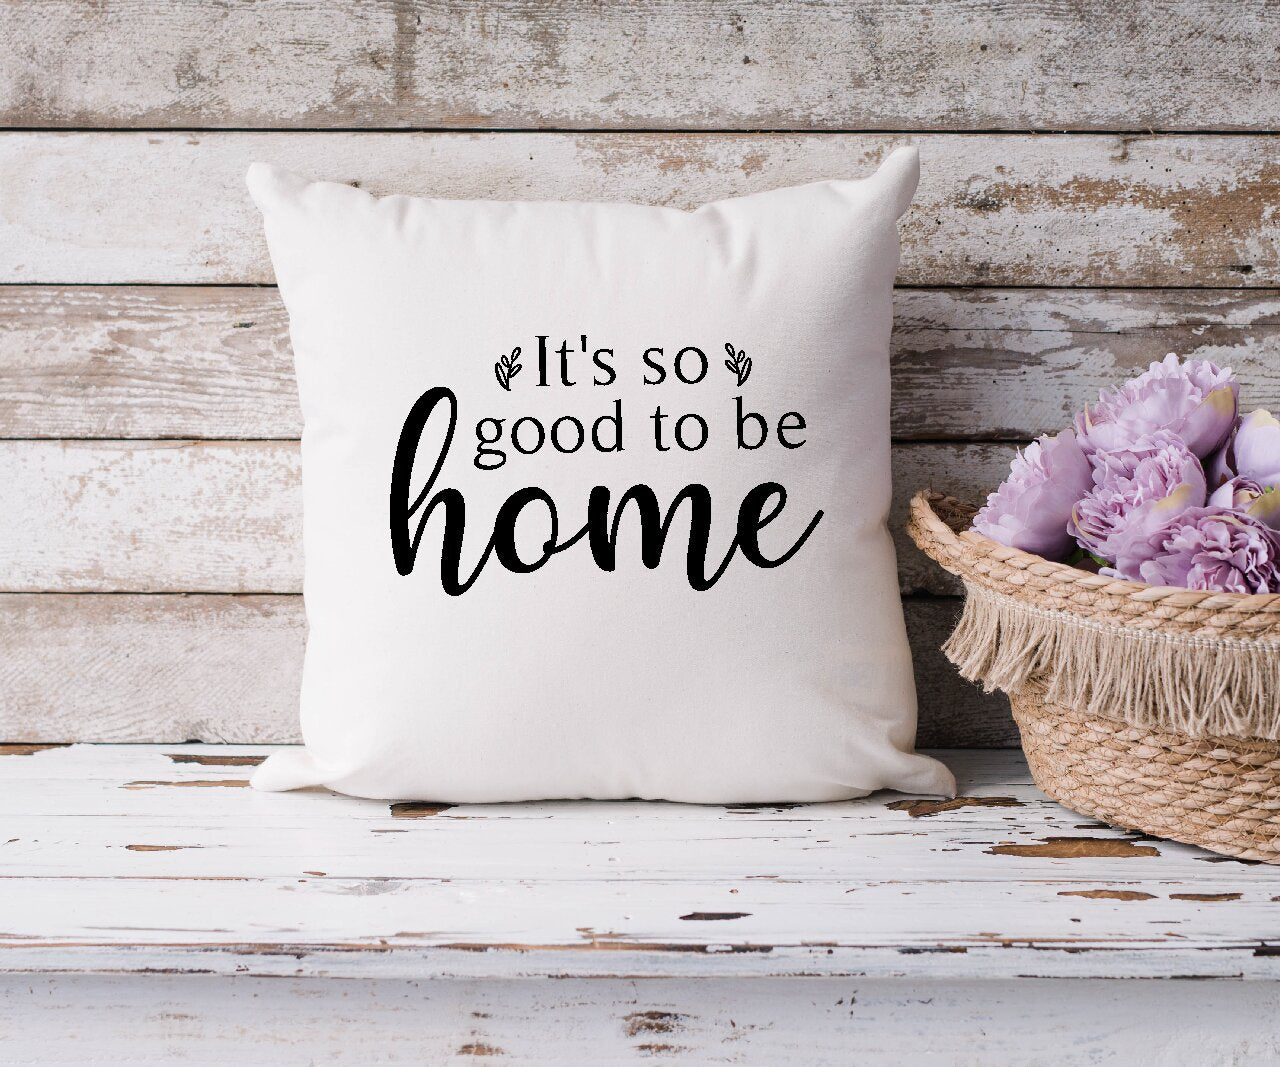 It's So Good to be Home - Cushion Cover